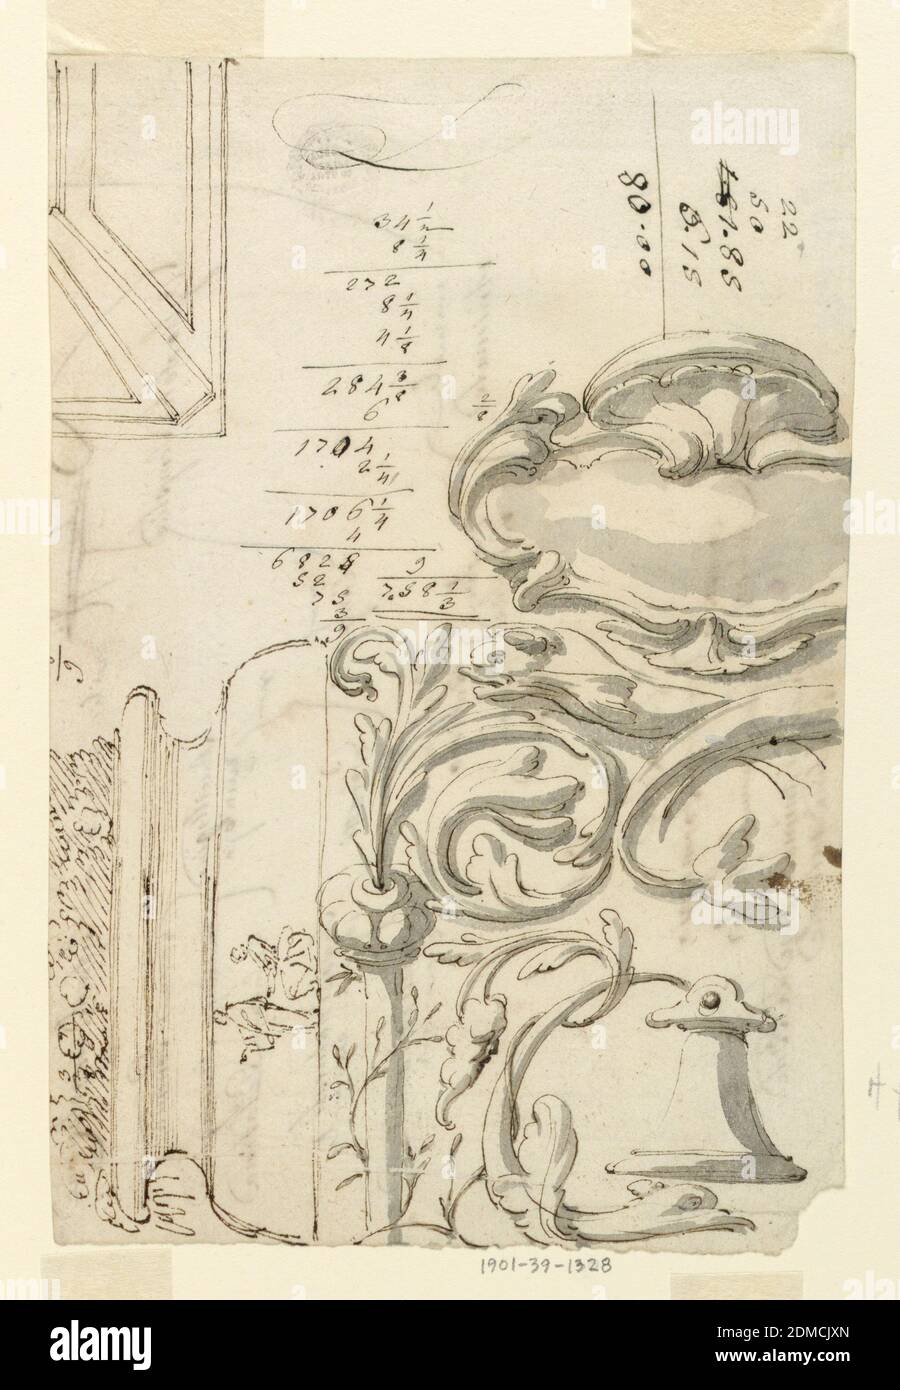 Sketches, Filippo Marchionni, Italian, 1732–1805, Pen and ink, brush and gray watercolor on paper, Top left: ceiling decoration with panels and bands. Bottom right: panel decoration with grotesque motifs and escutcheon on top; beneath it are dolphins with crossing tails; a bell hands from the tail of another dolphin farther below. Lower left: a vase in the shape of a column base, filled; a standing man and a kneeling woman are shown in the bottom molding; some accounting figures. On verso: fragment of a written tablet pertinent to a chemical system beginning with Ogio dolce semplice Stock Photo